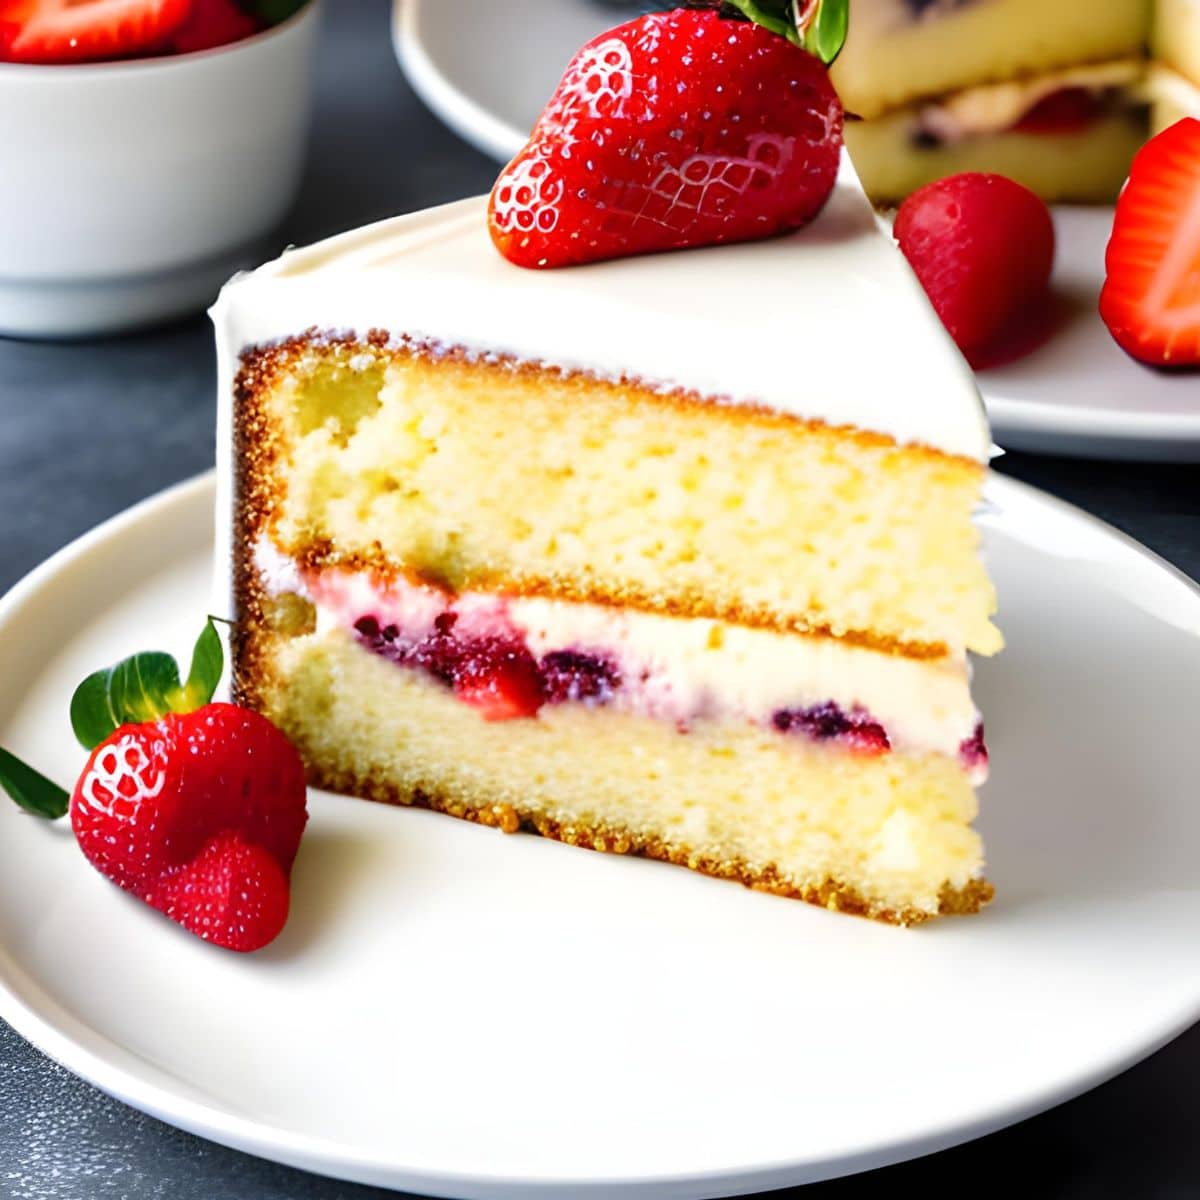 A slice of vanilla cake with strawberry sauce filling between the layers.